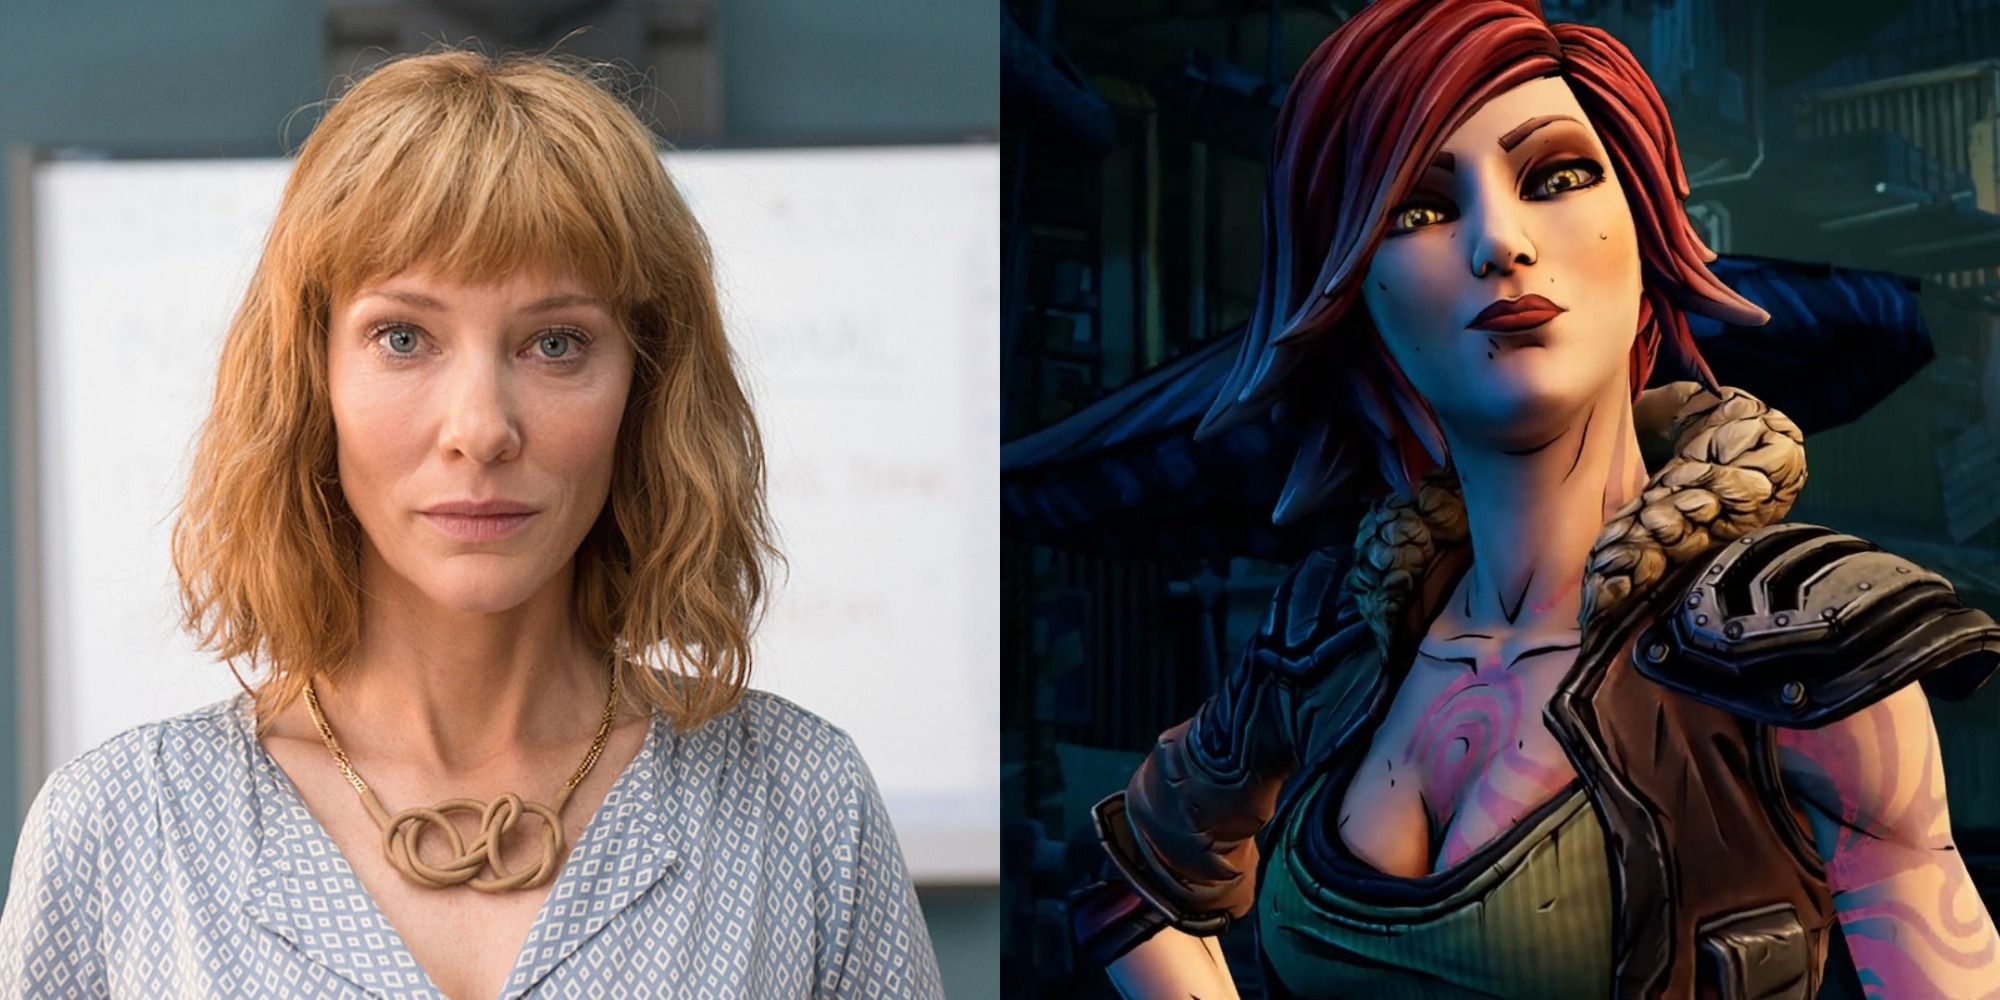 borderlands cate blanchett as lilith